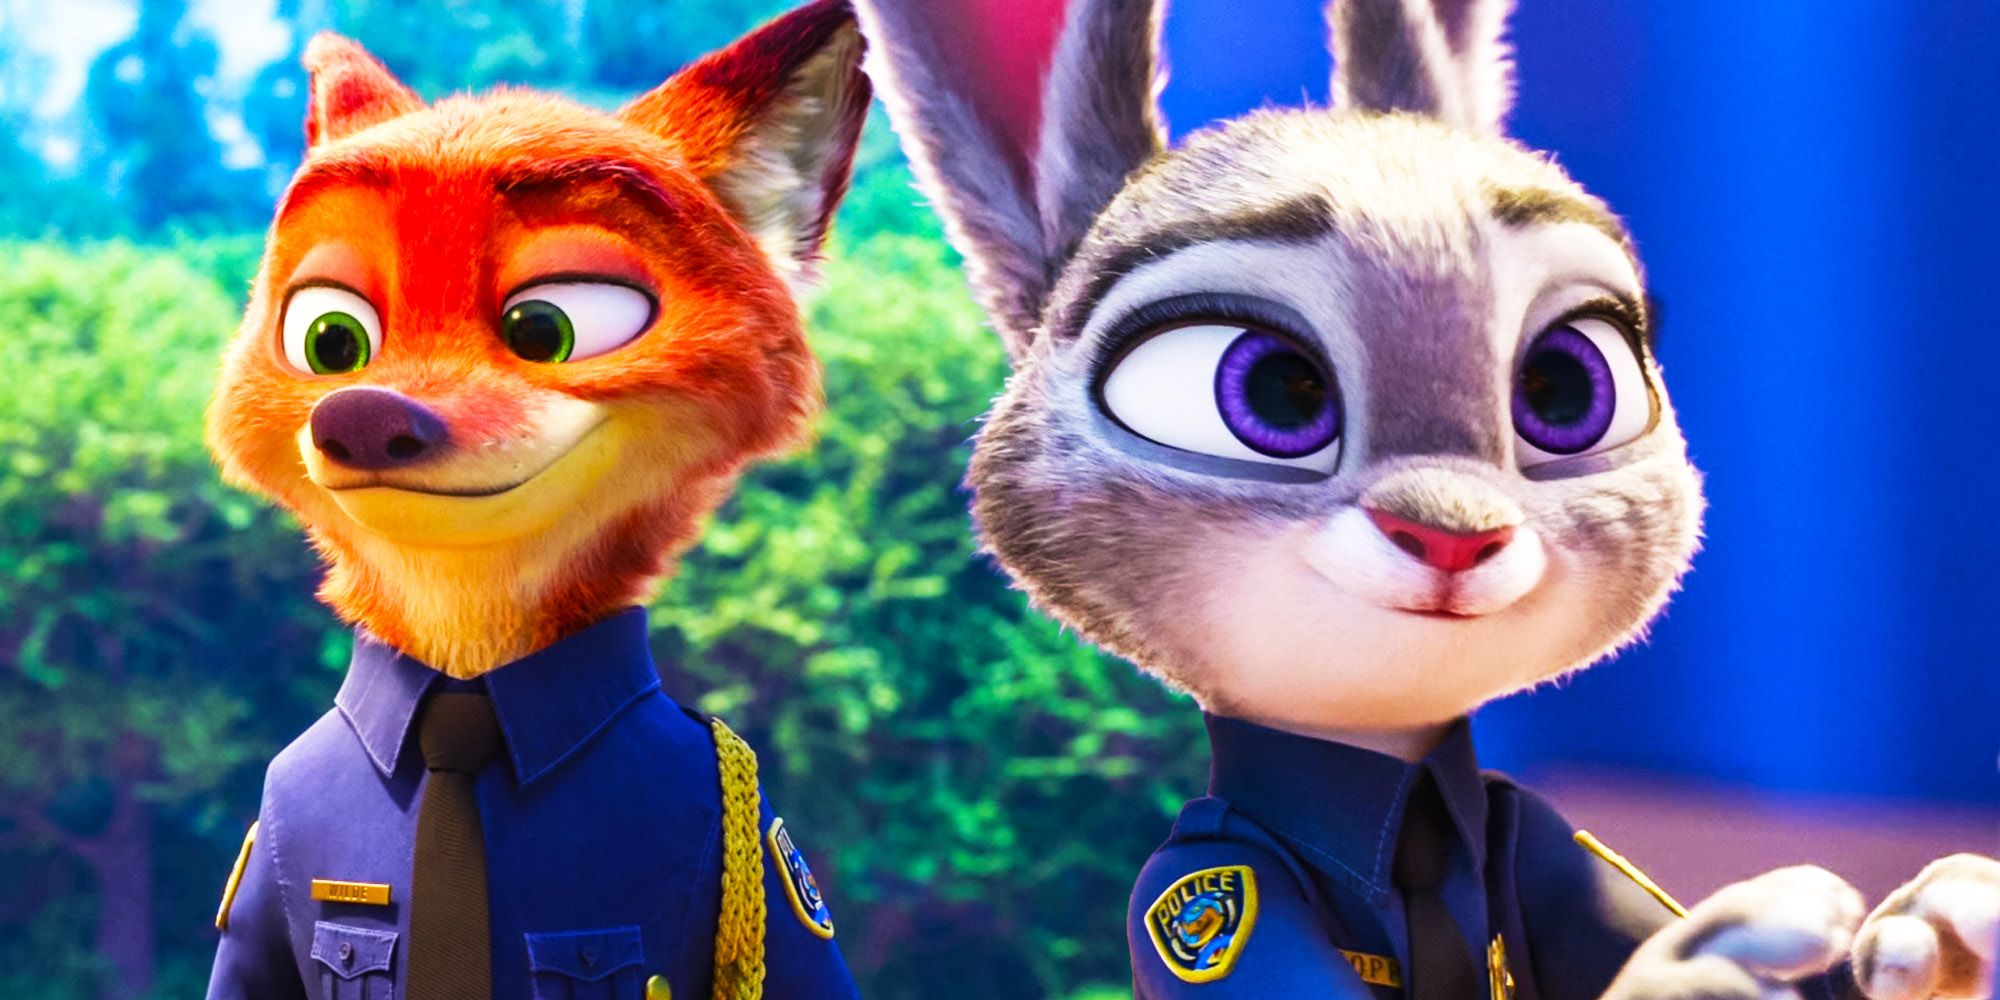 Custom image of Nick and Judy from Zootopia